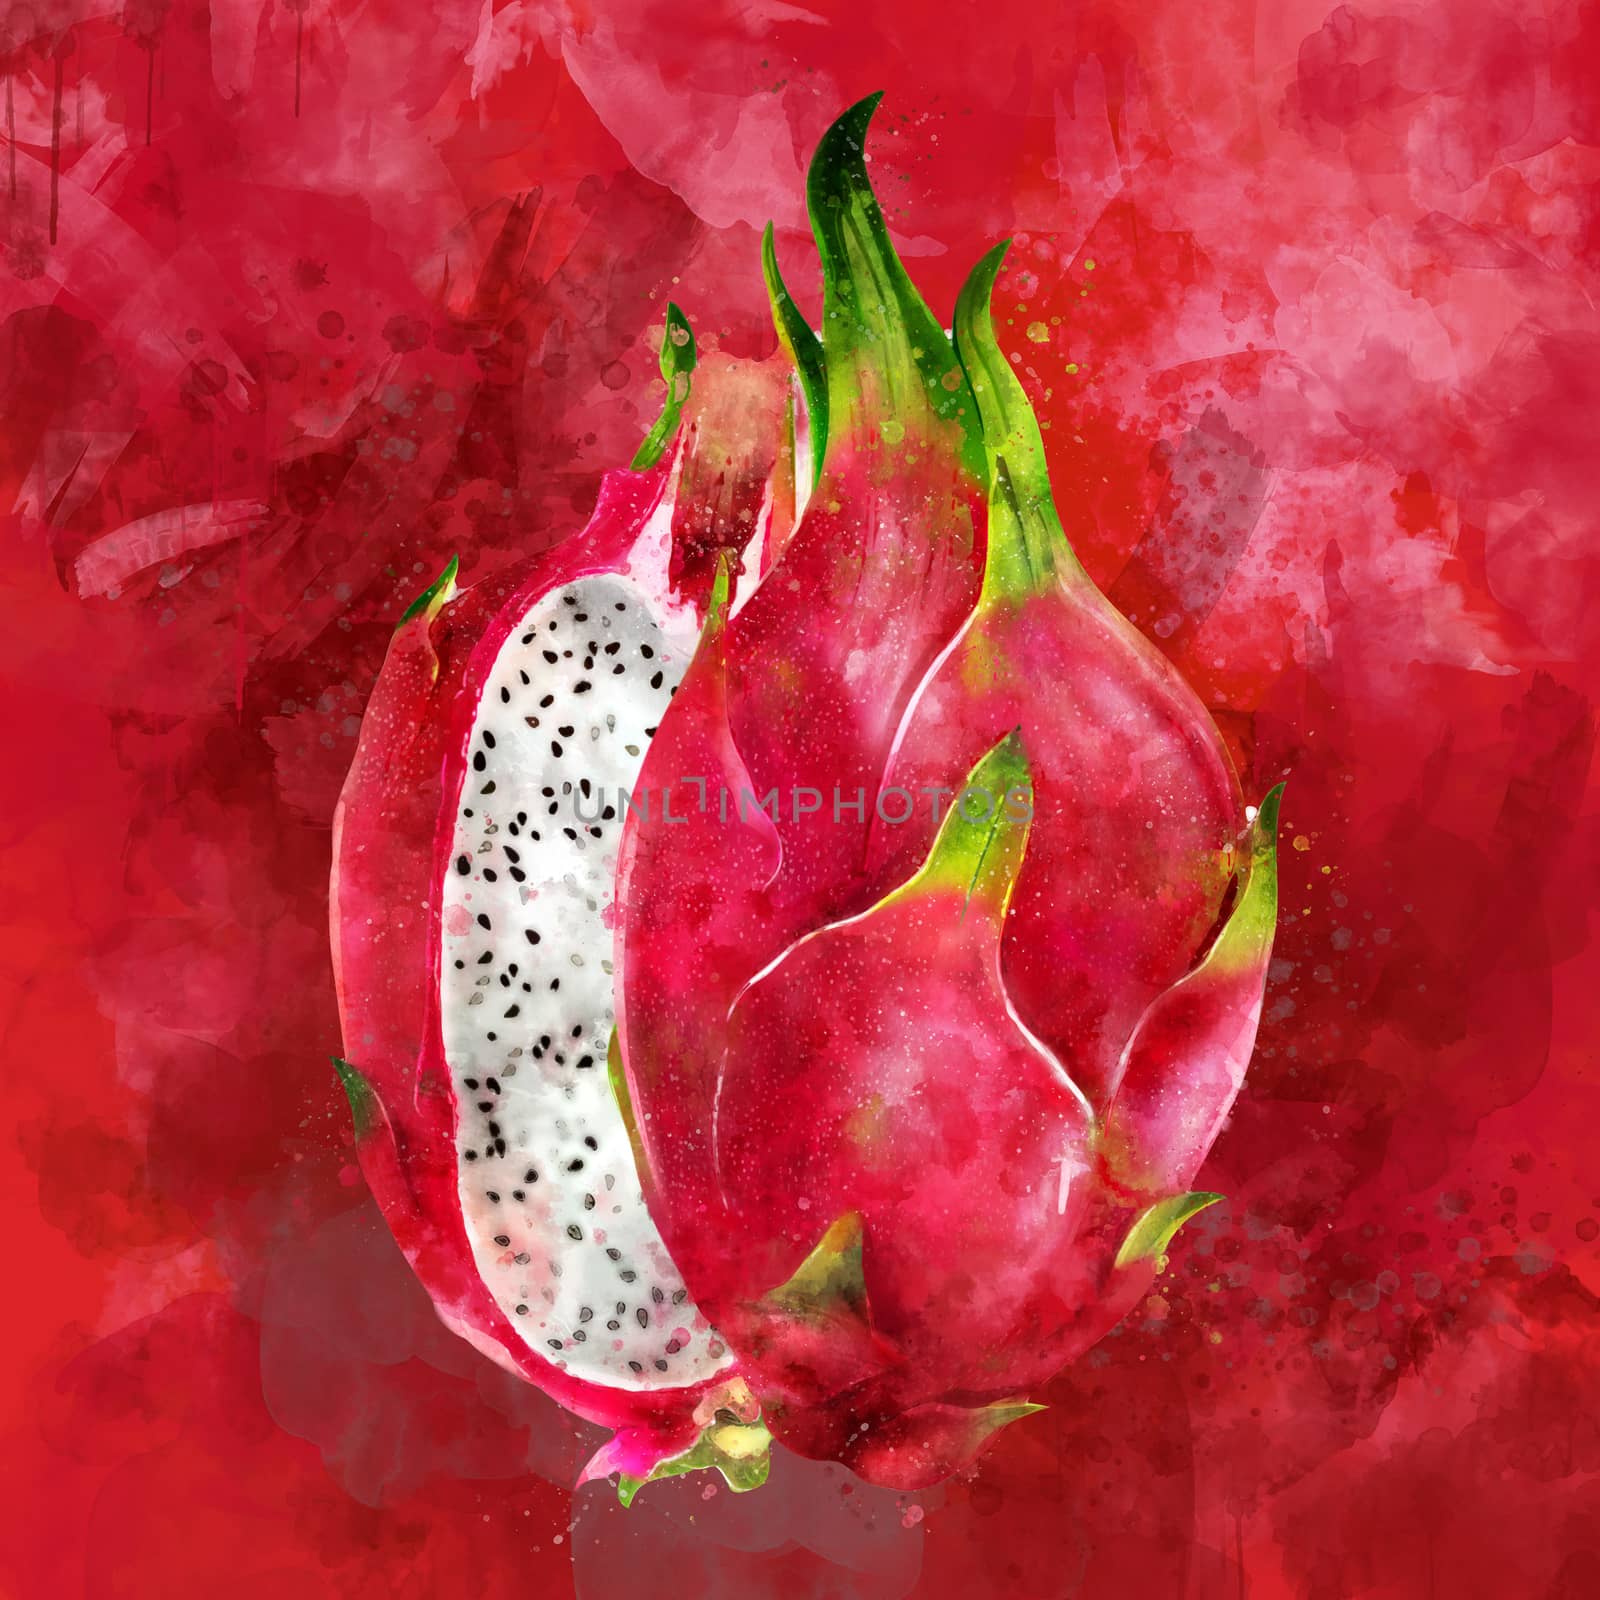 Dragon Fruit on red background. Watercolor illustration by ConceptCafe